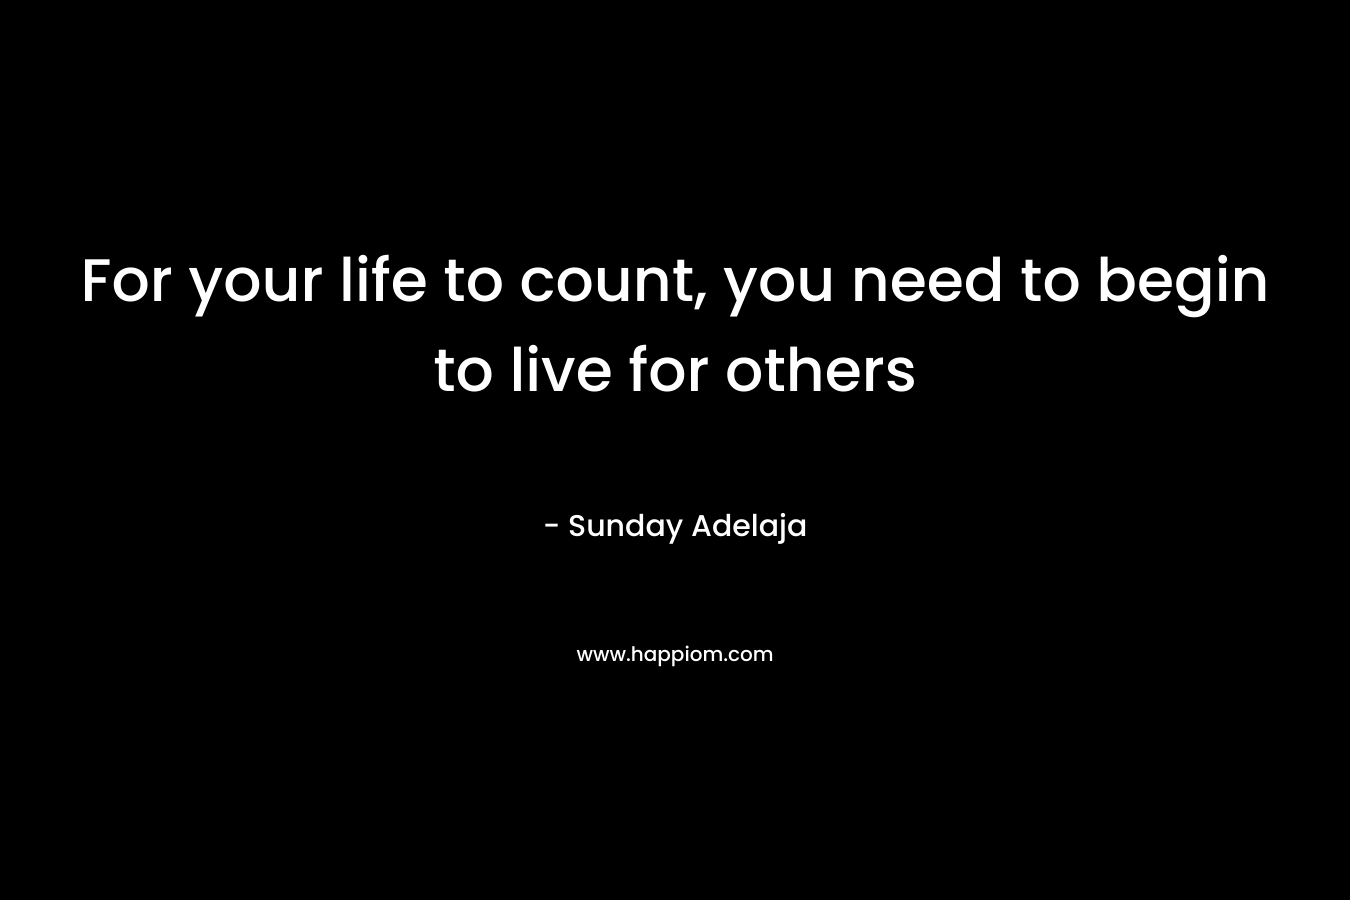 For your life to count, you need to begin to live for others